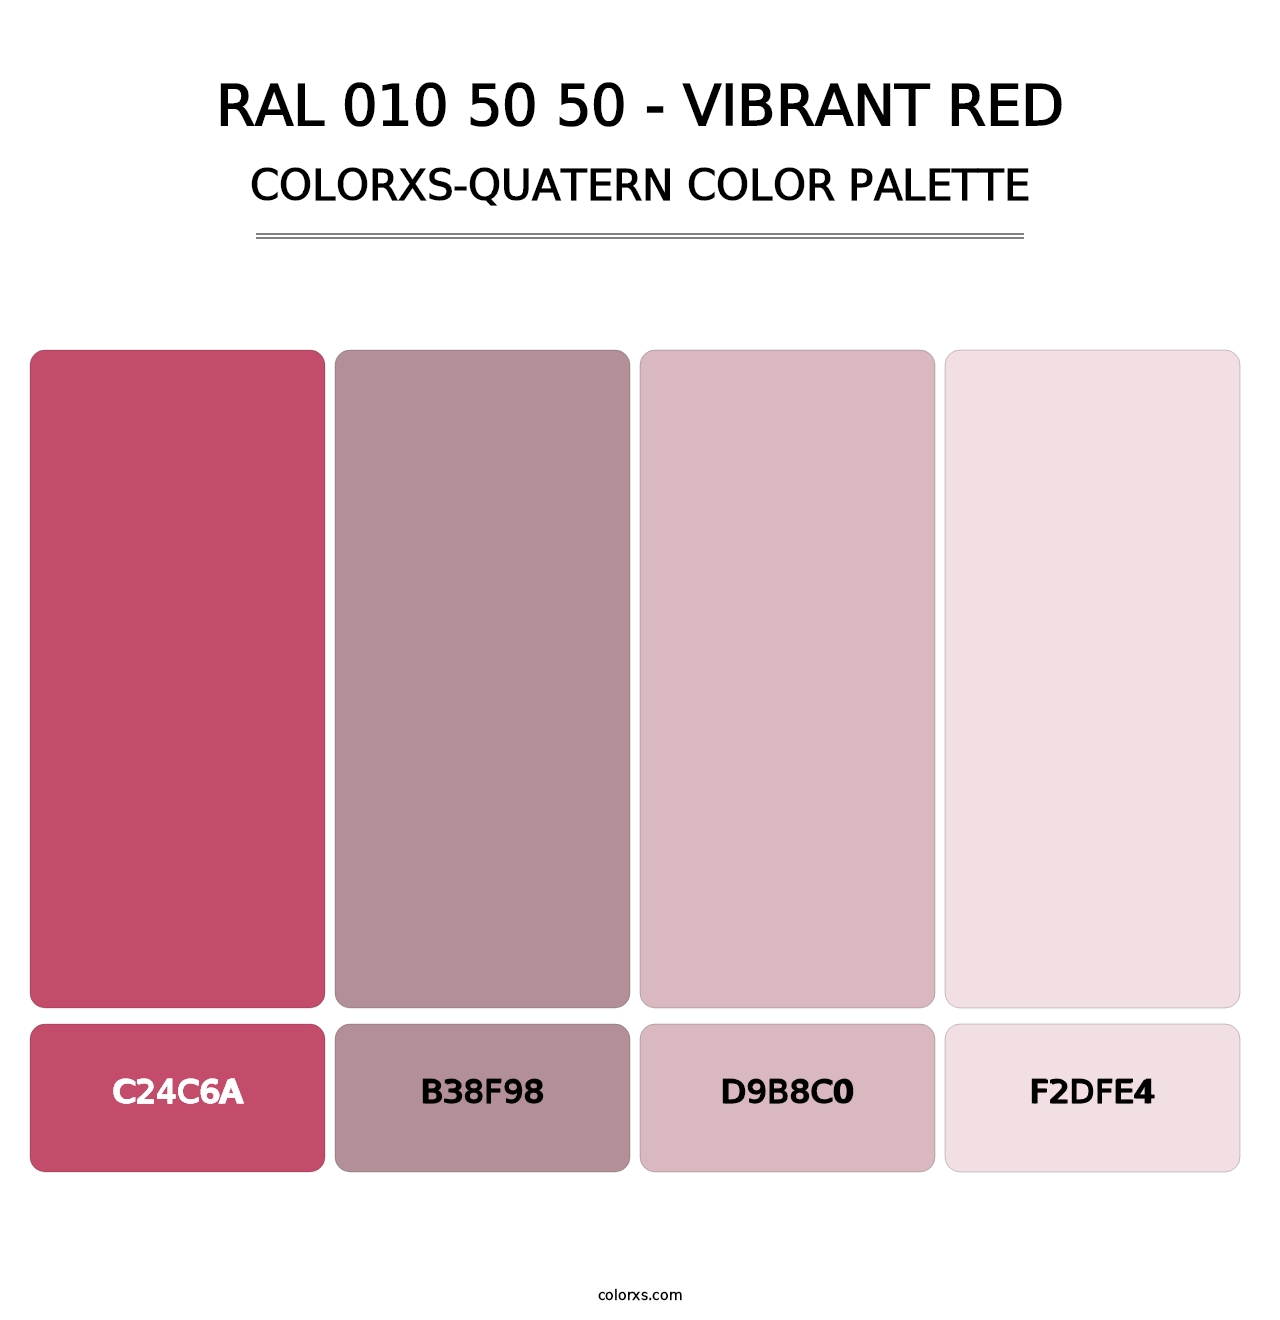 RAL 010 50 50 - Vibrant Red - Colorxs Quatern Palette